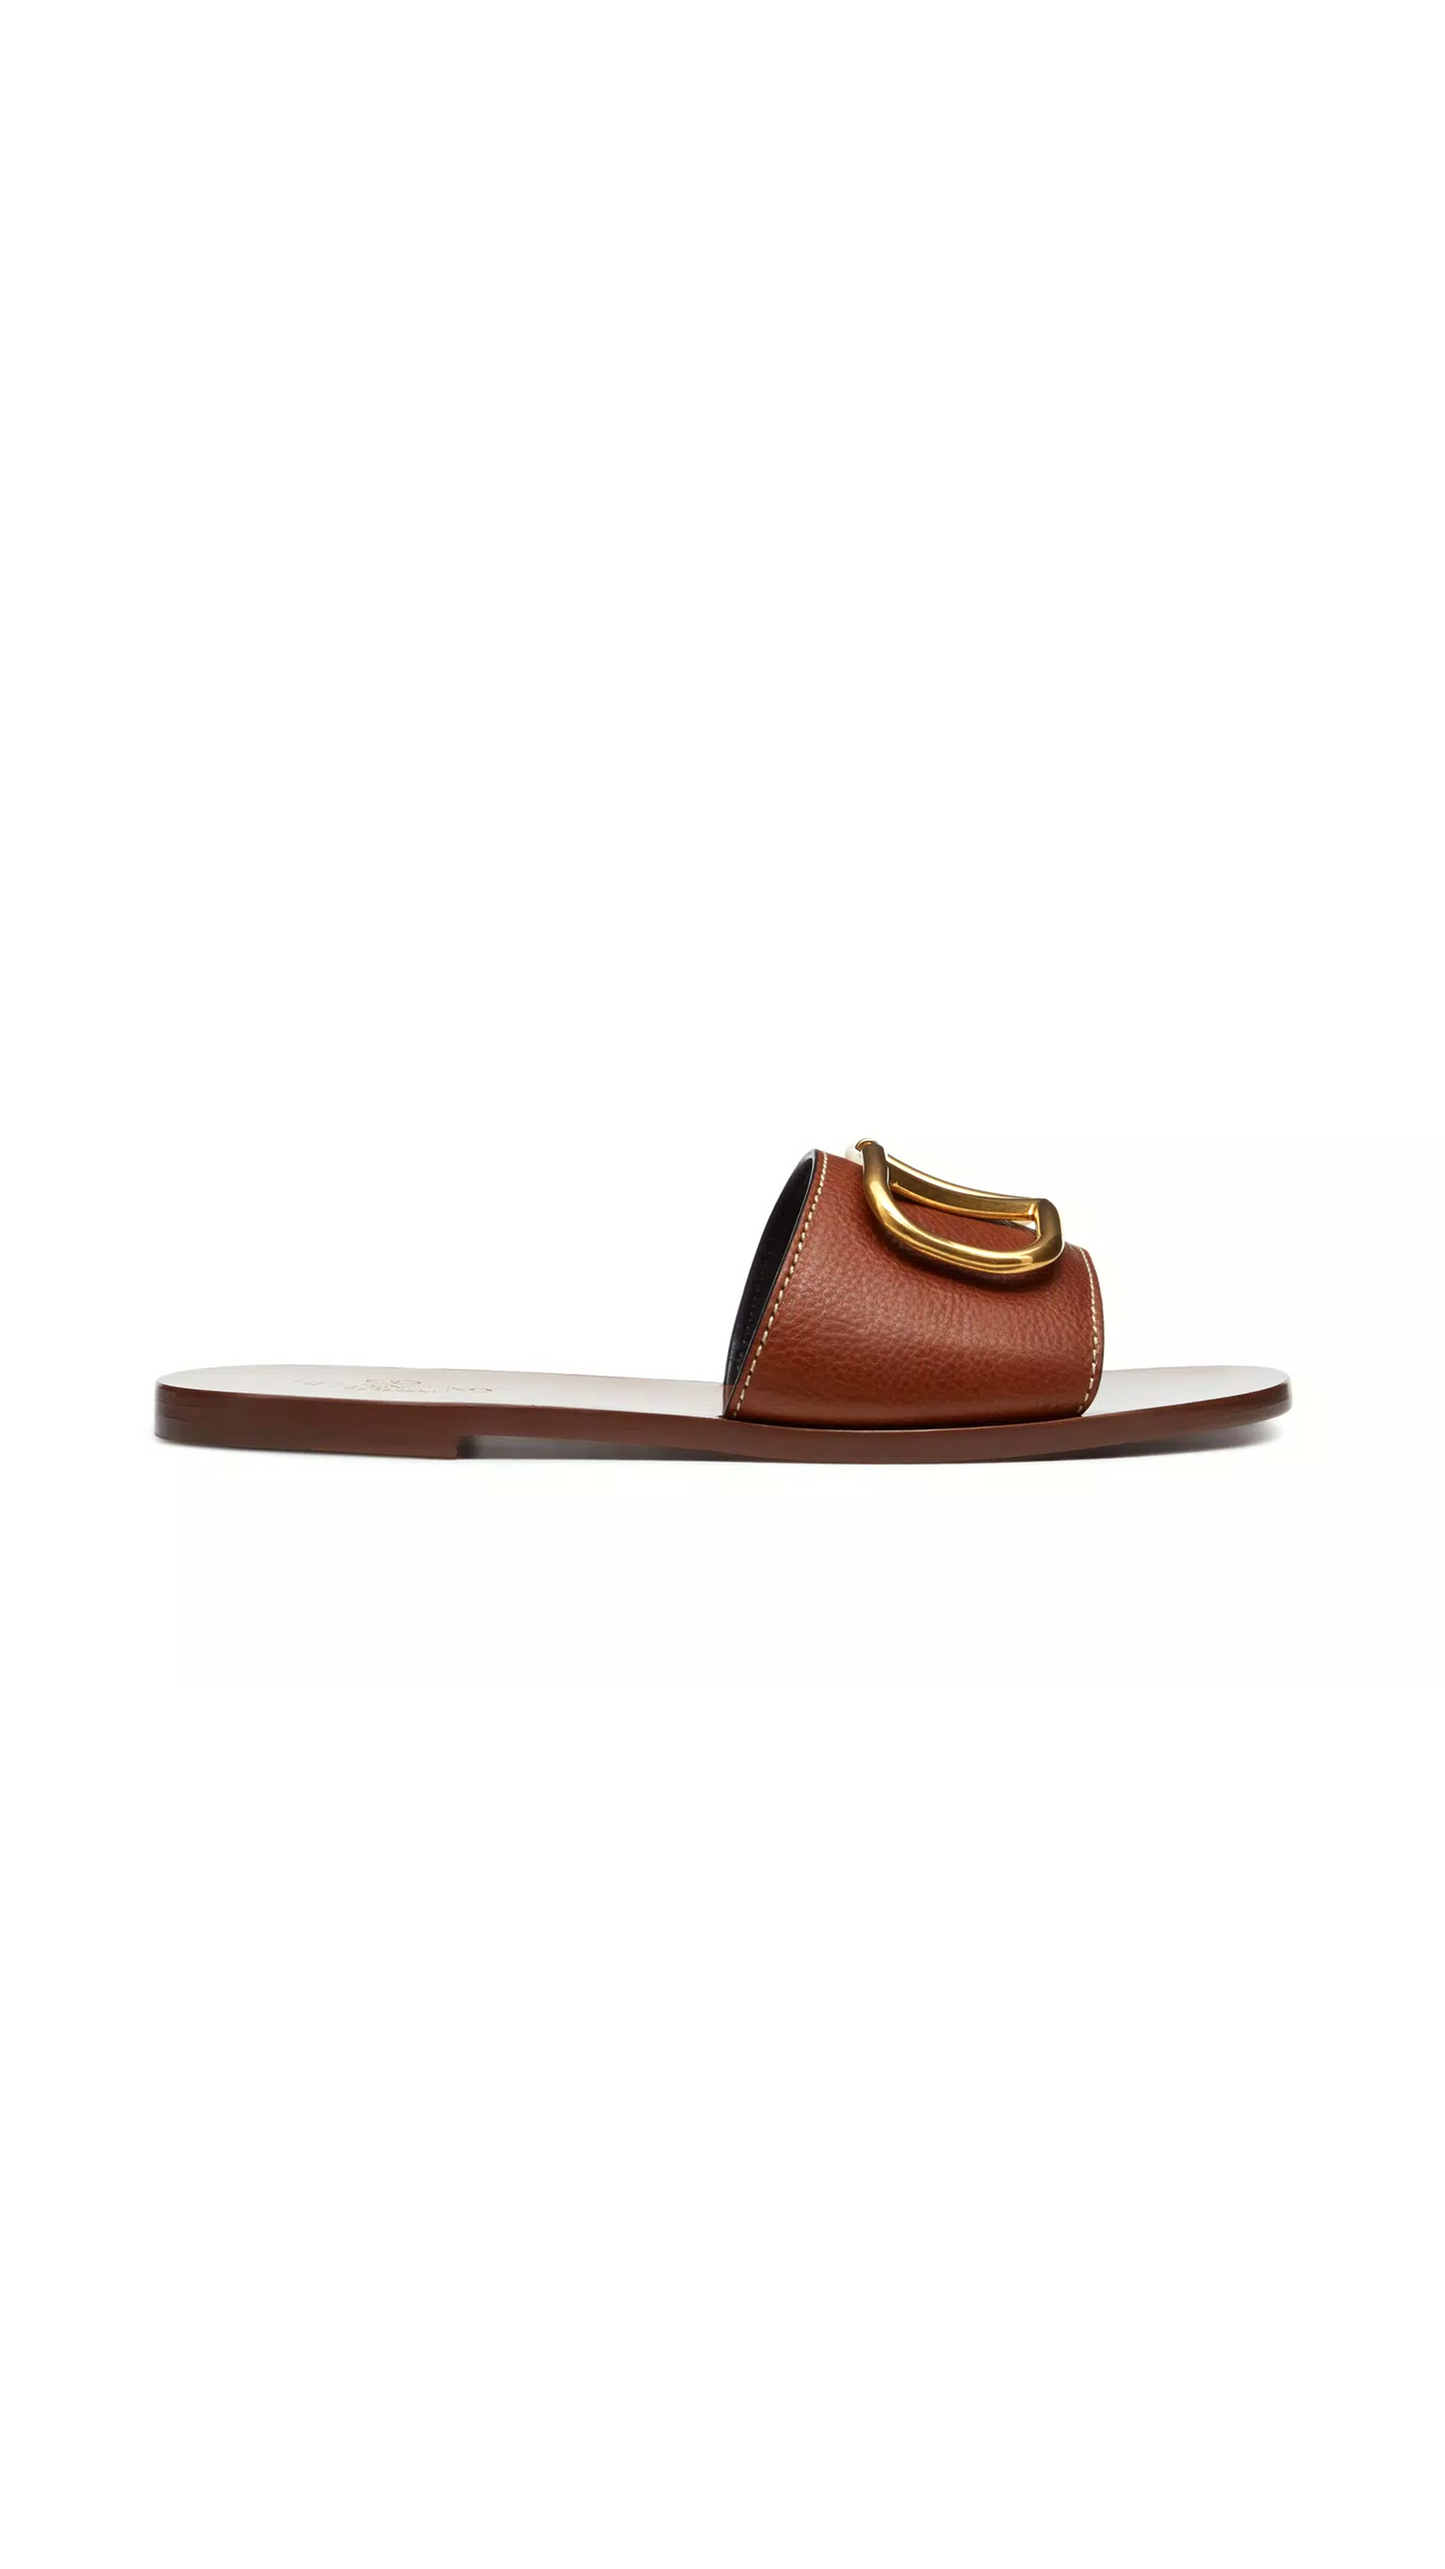 Vlogo Signature Slide Sandal in Grainy Cowhide with Accessory - Tan